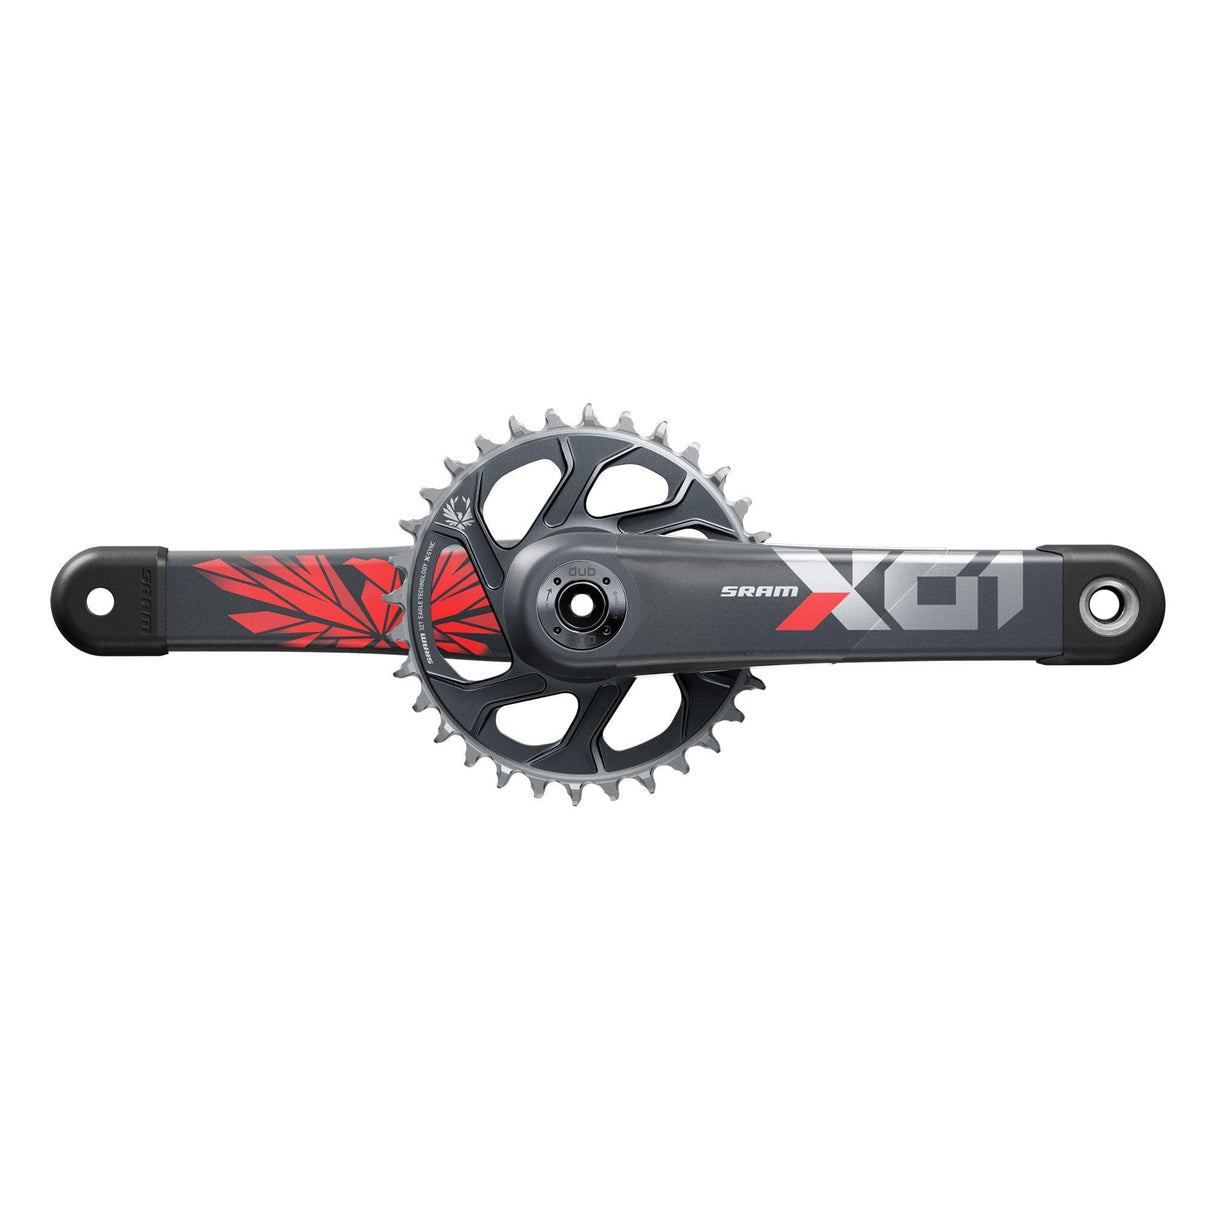 Sram Crankset X01 Eagle Superboost+ Dub 12S W Direct Mount 32T X-Sync 2 Chainring (Dub Cups/Bearings Not Included) C3: Lunar Oxy 170Mm